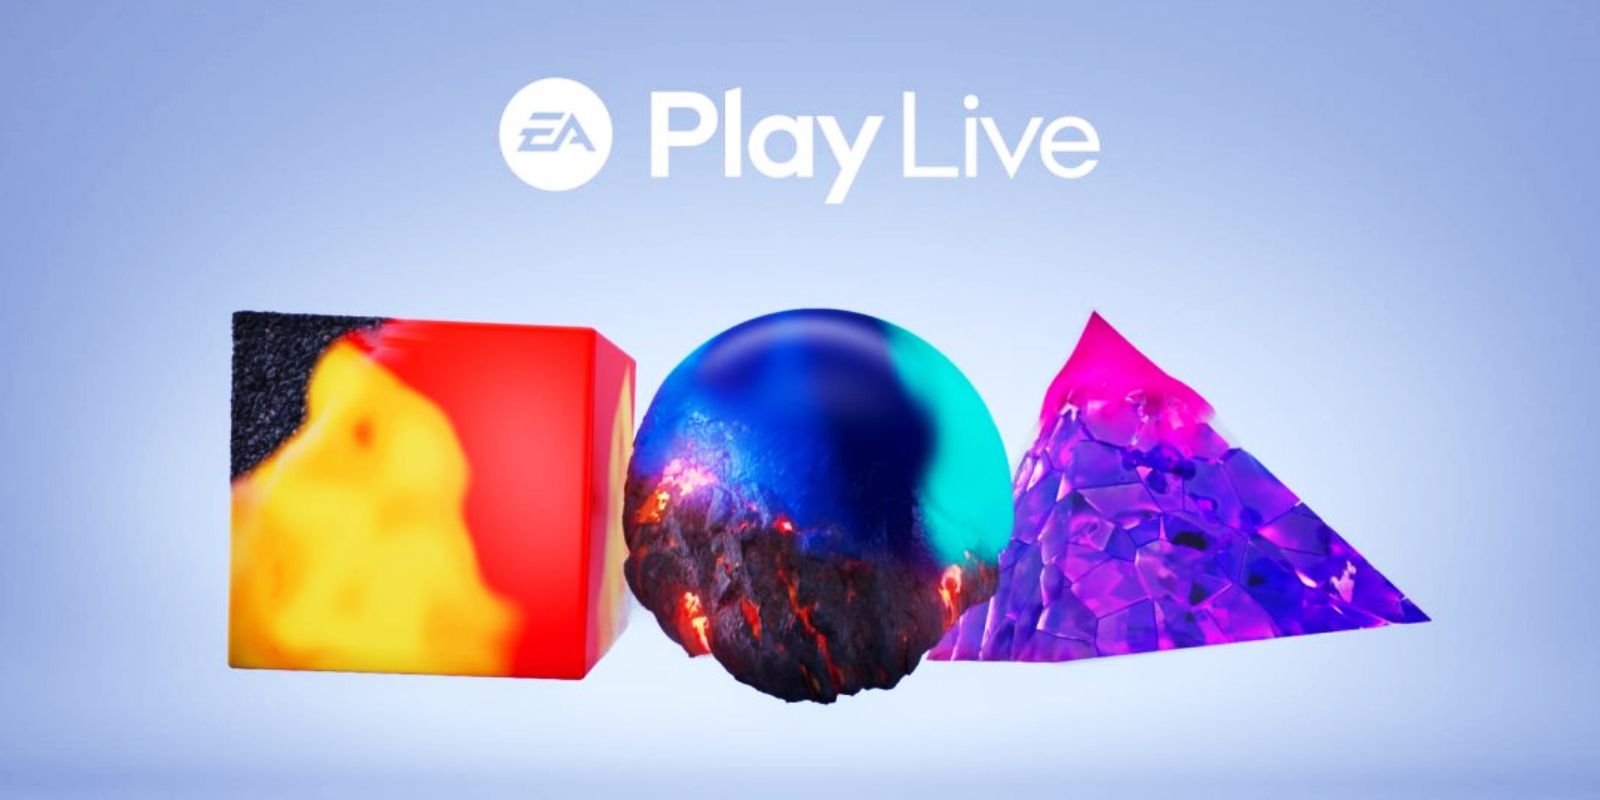 Everything Revealed At EA Play Live 2021